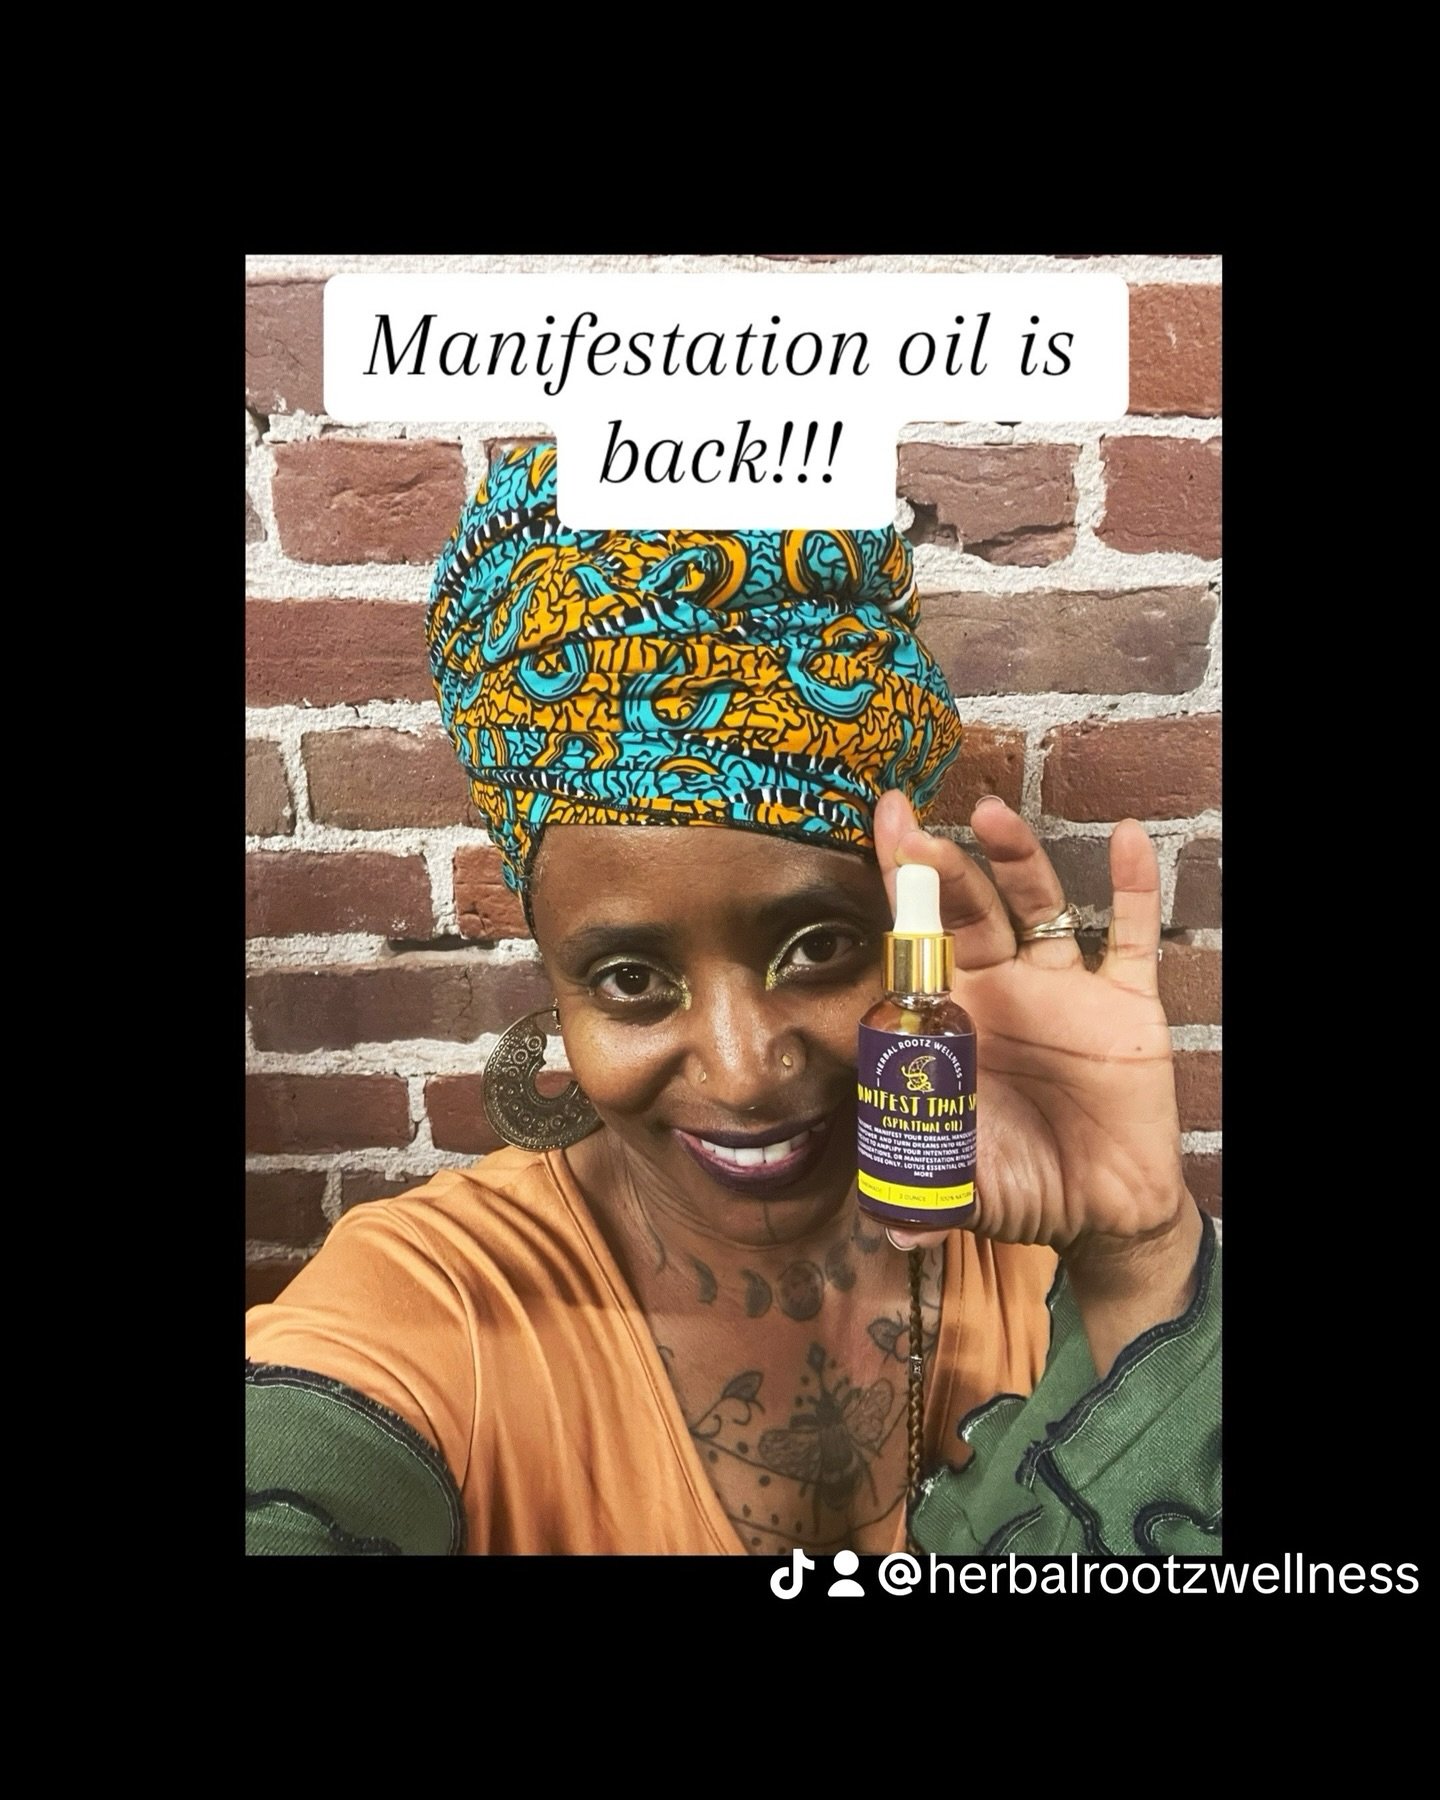 Herbal Rootz Wellness has restocked handmade manifestation oil! Crafted with care and intention, this oil can be applied to pulse points or included in your rituals to enhance your intentions and bring your dreams to life. 💫✨

Utilize the power of n